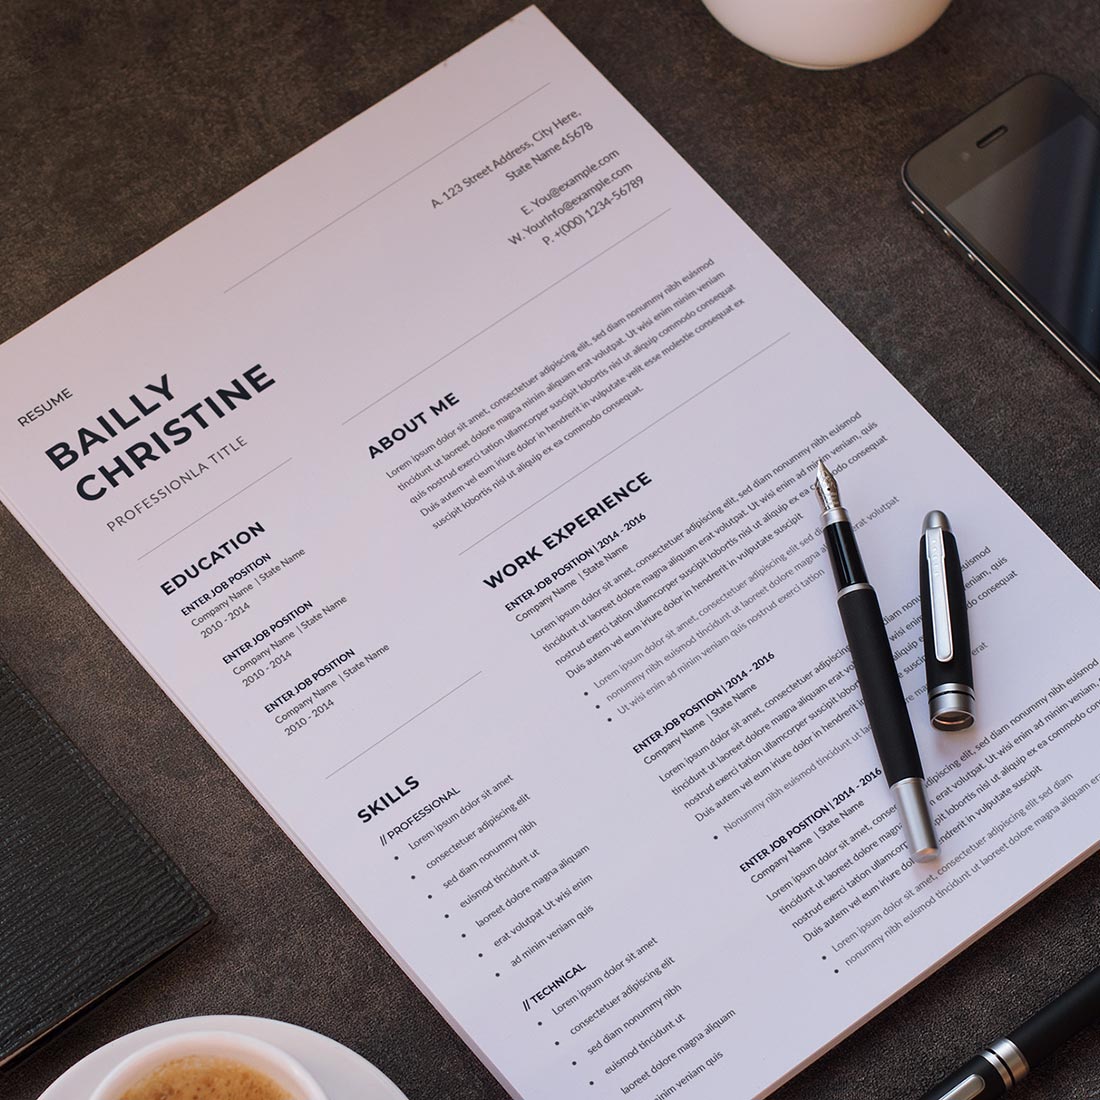 Cup of coffee and a menu on a table.